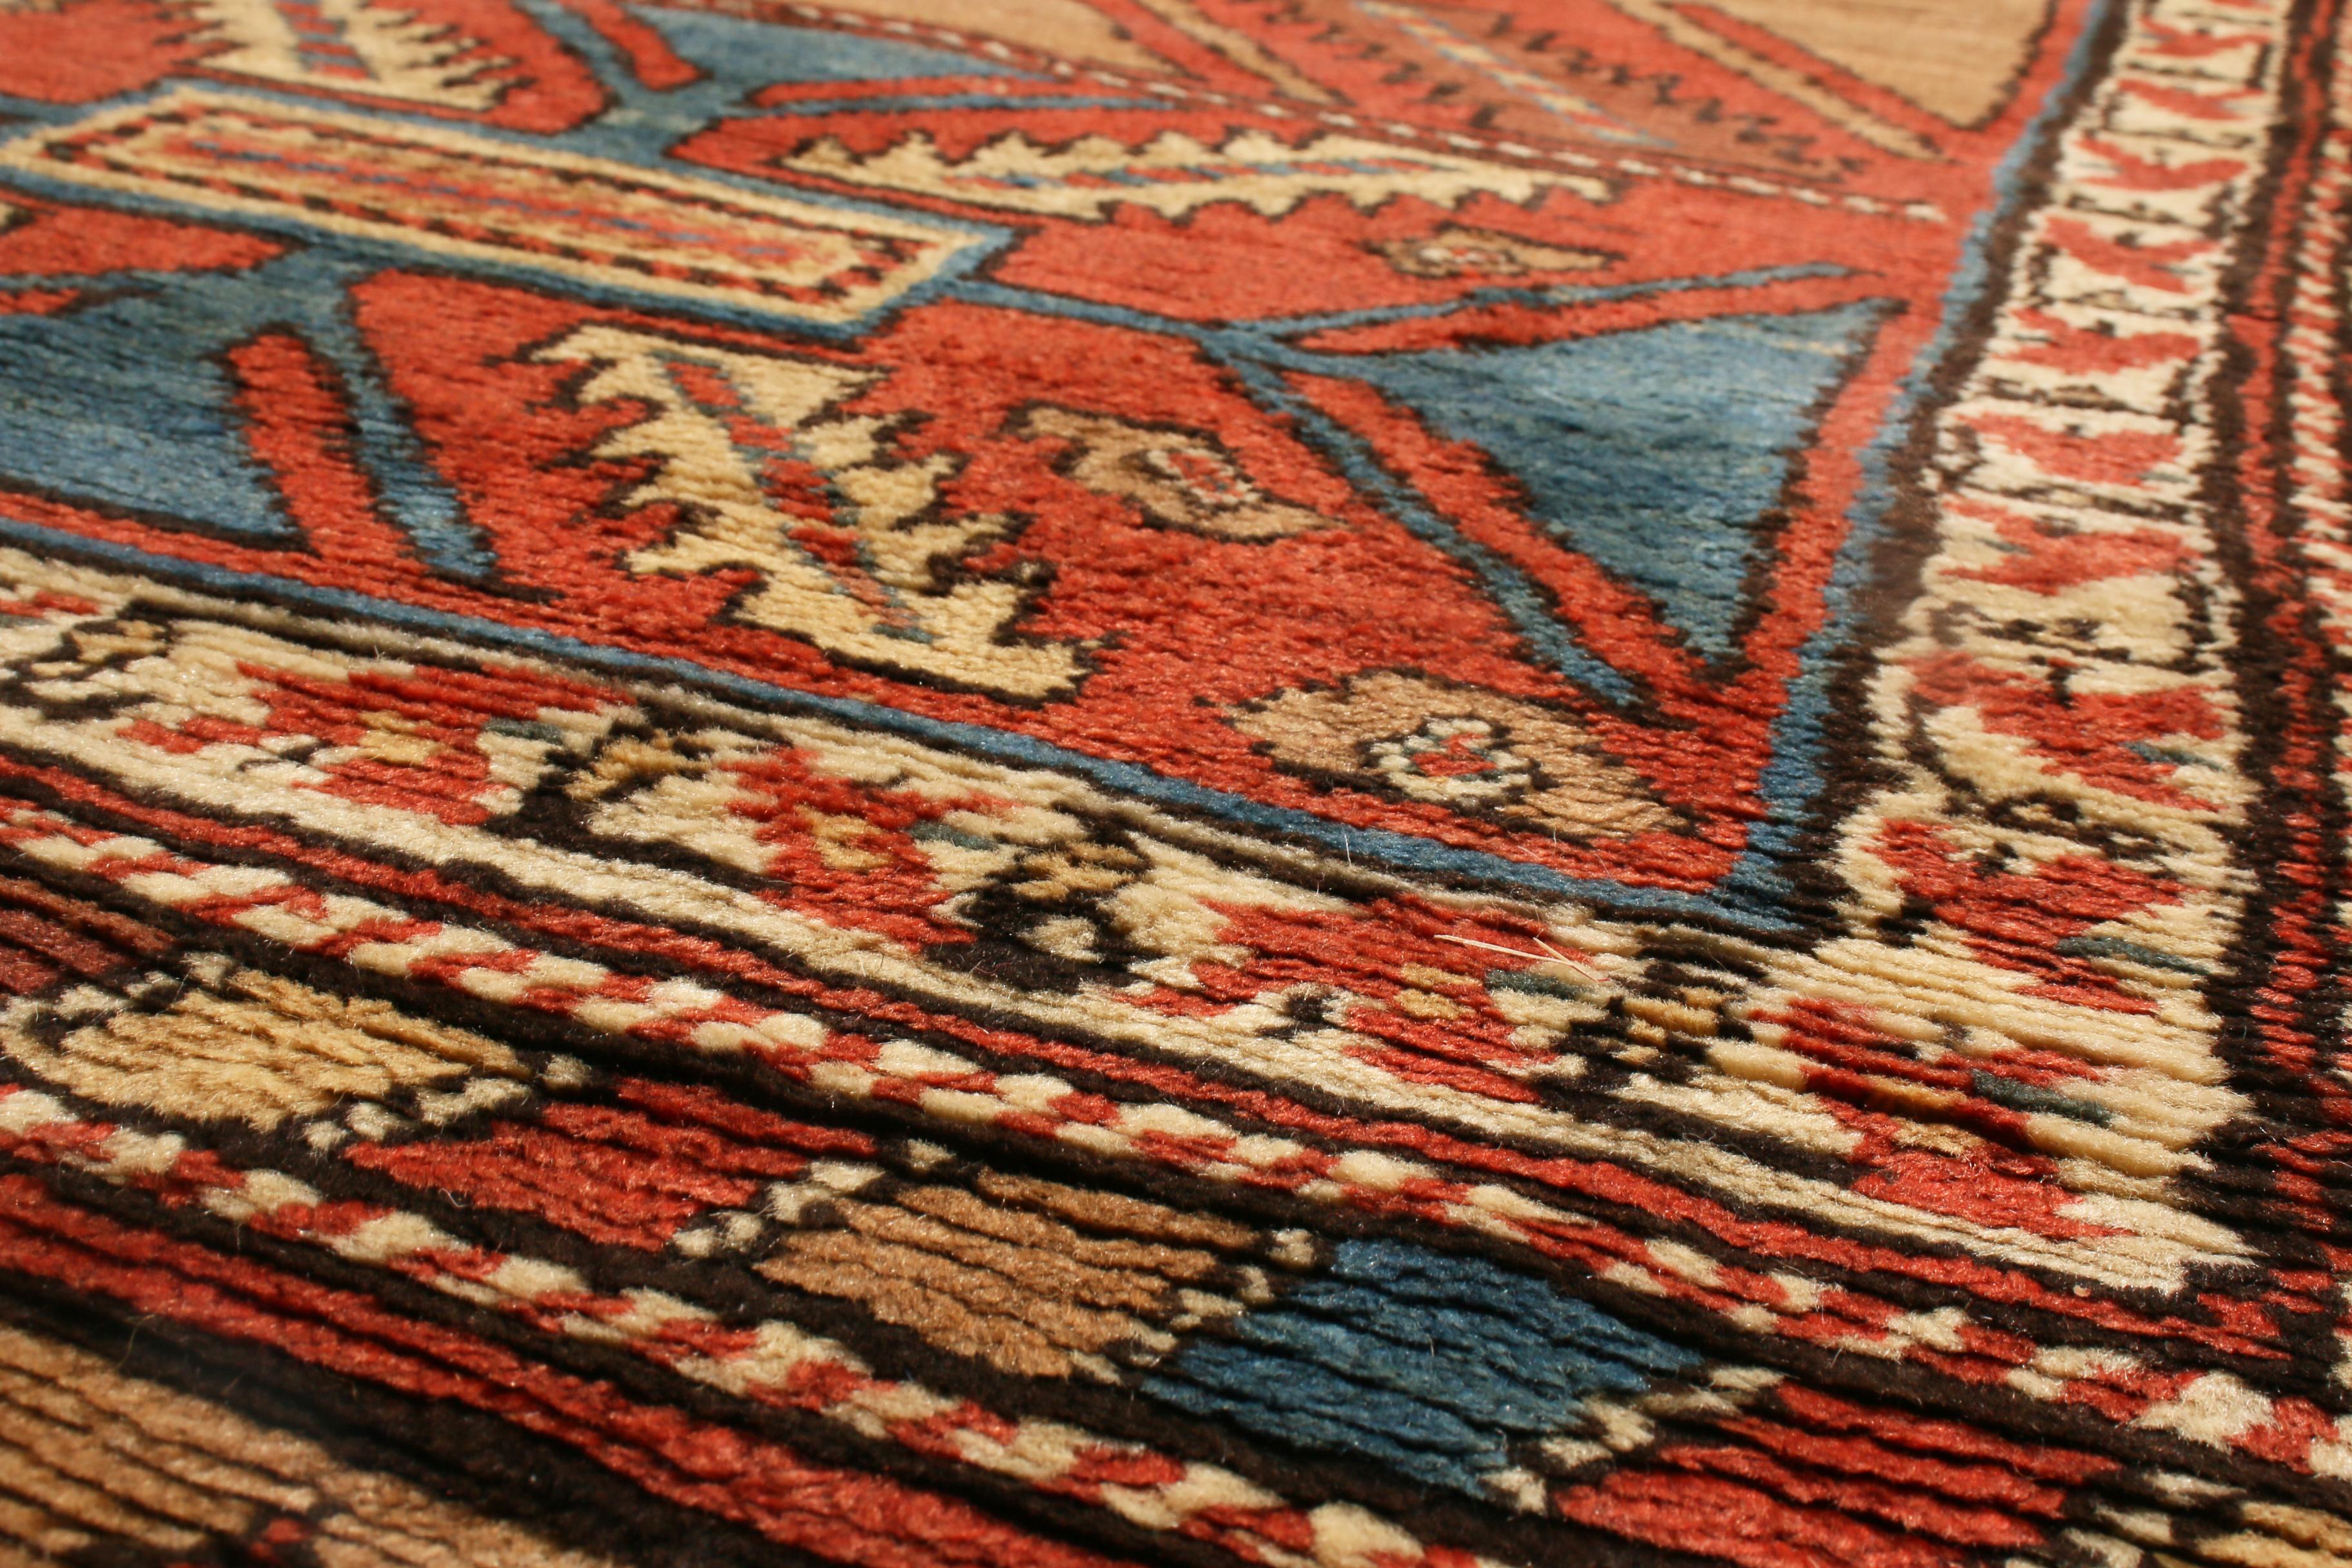 Antique Bakhshaish Red and Blue Geometric Wool Persian Runner with Bronze 1